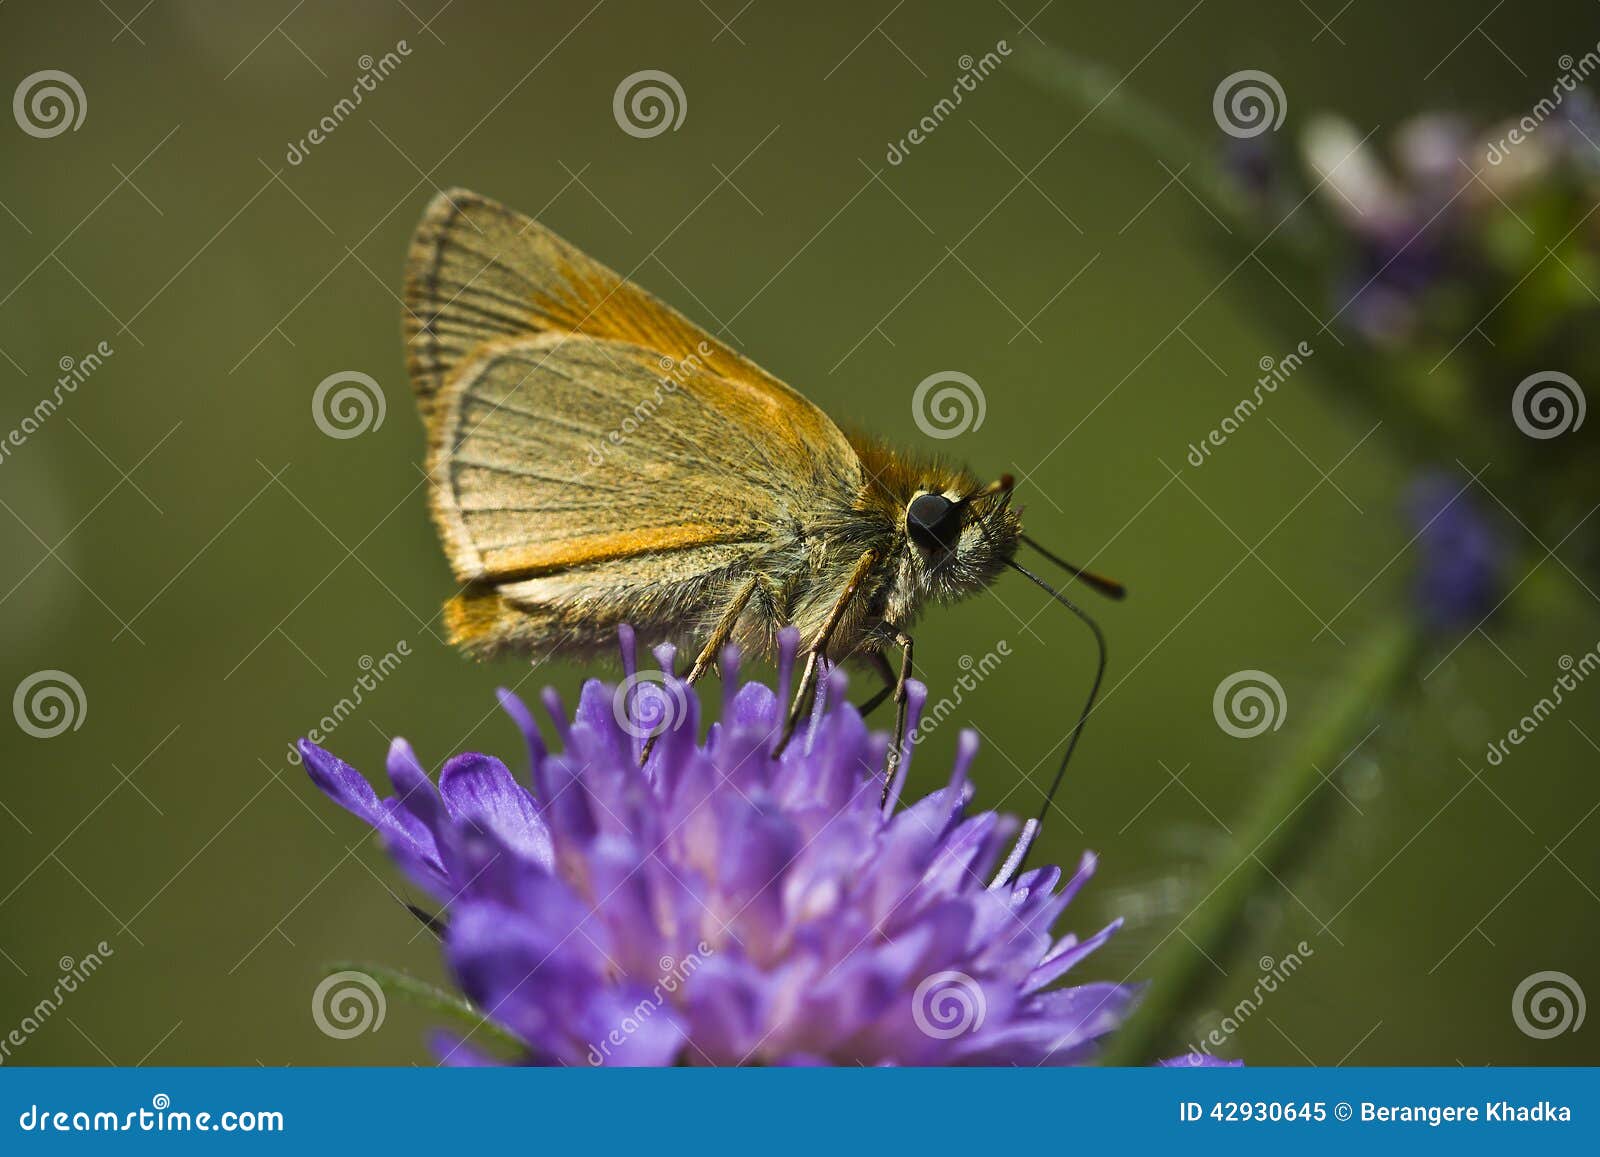 butterfly on a flower, vosges, france